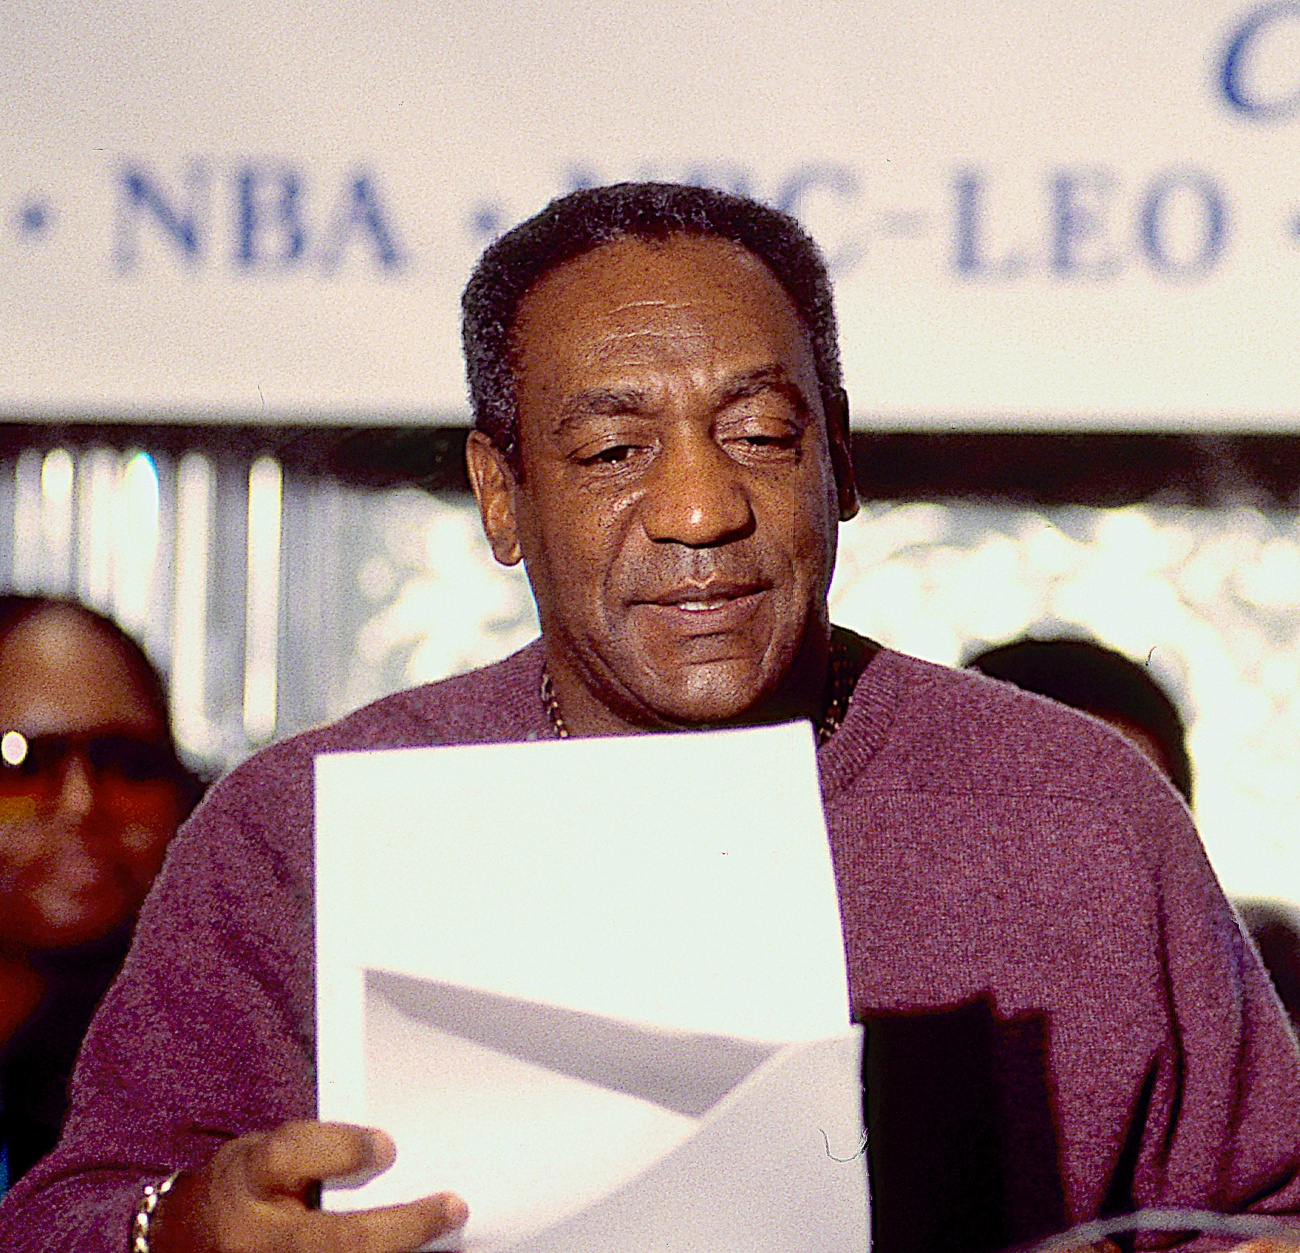 Cosby's team denies accusation